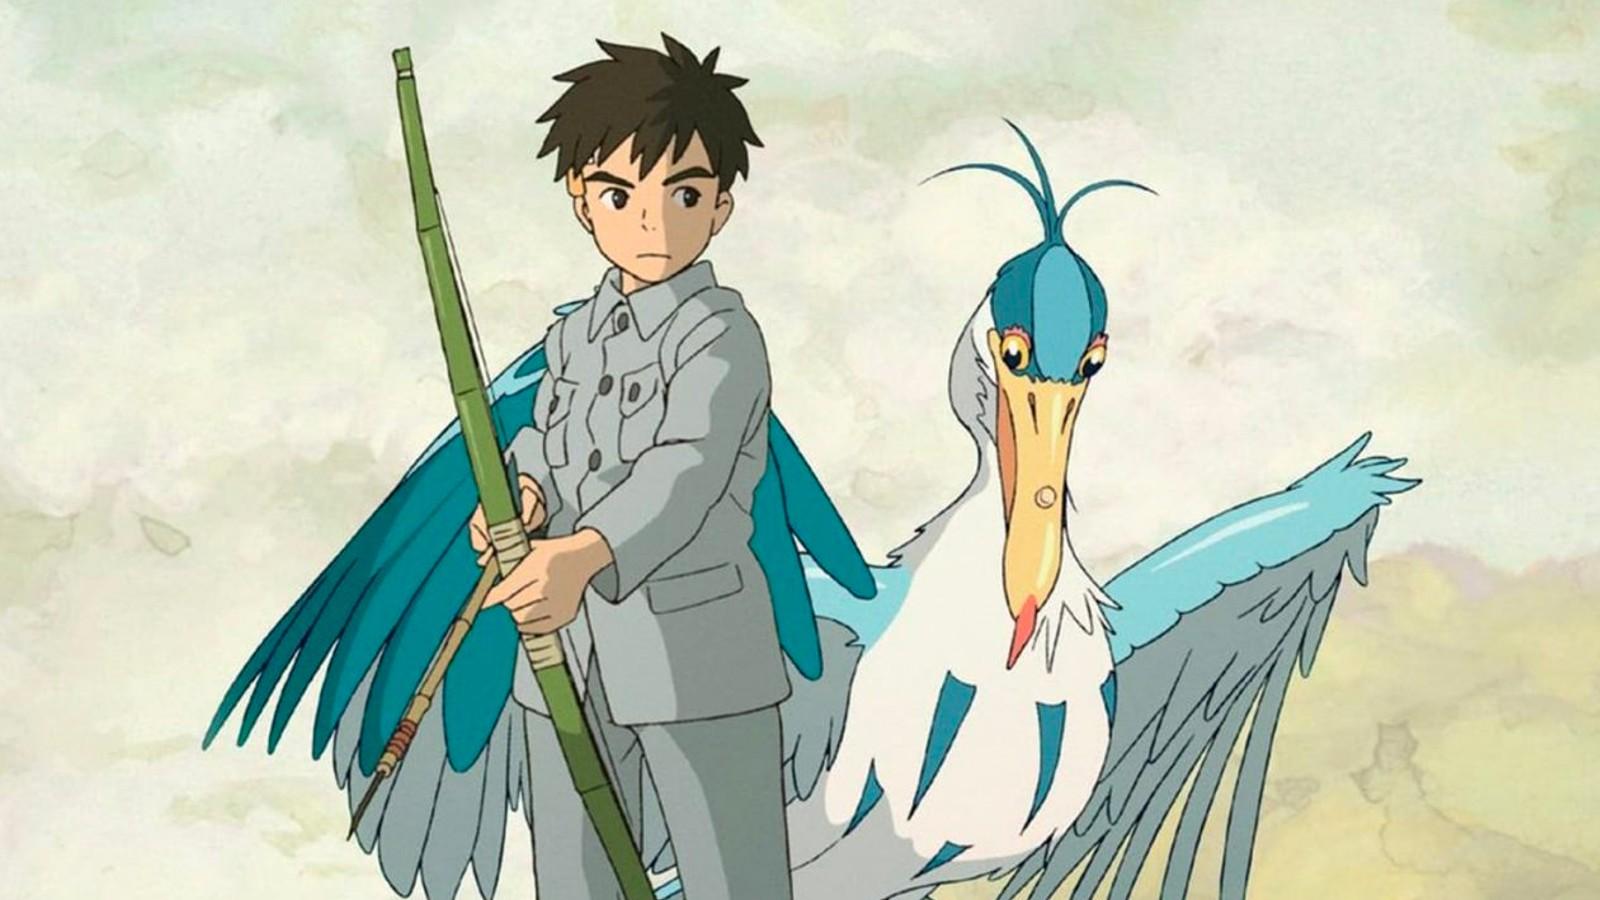 The poster for The Boy and the Heron Netflix